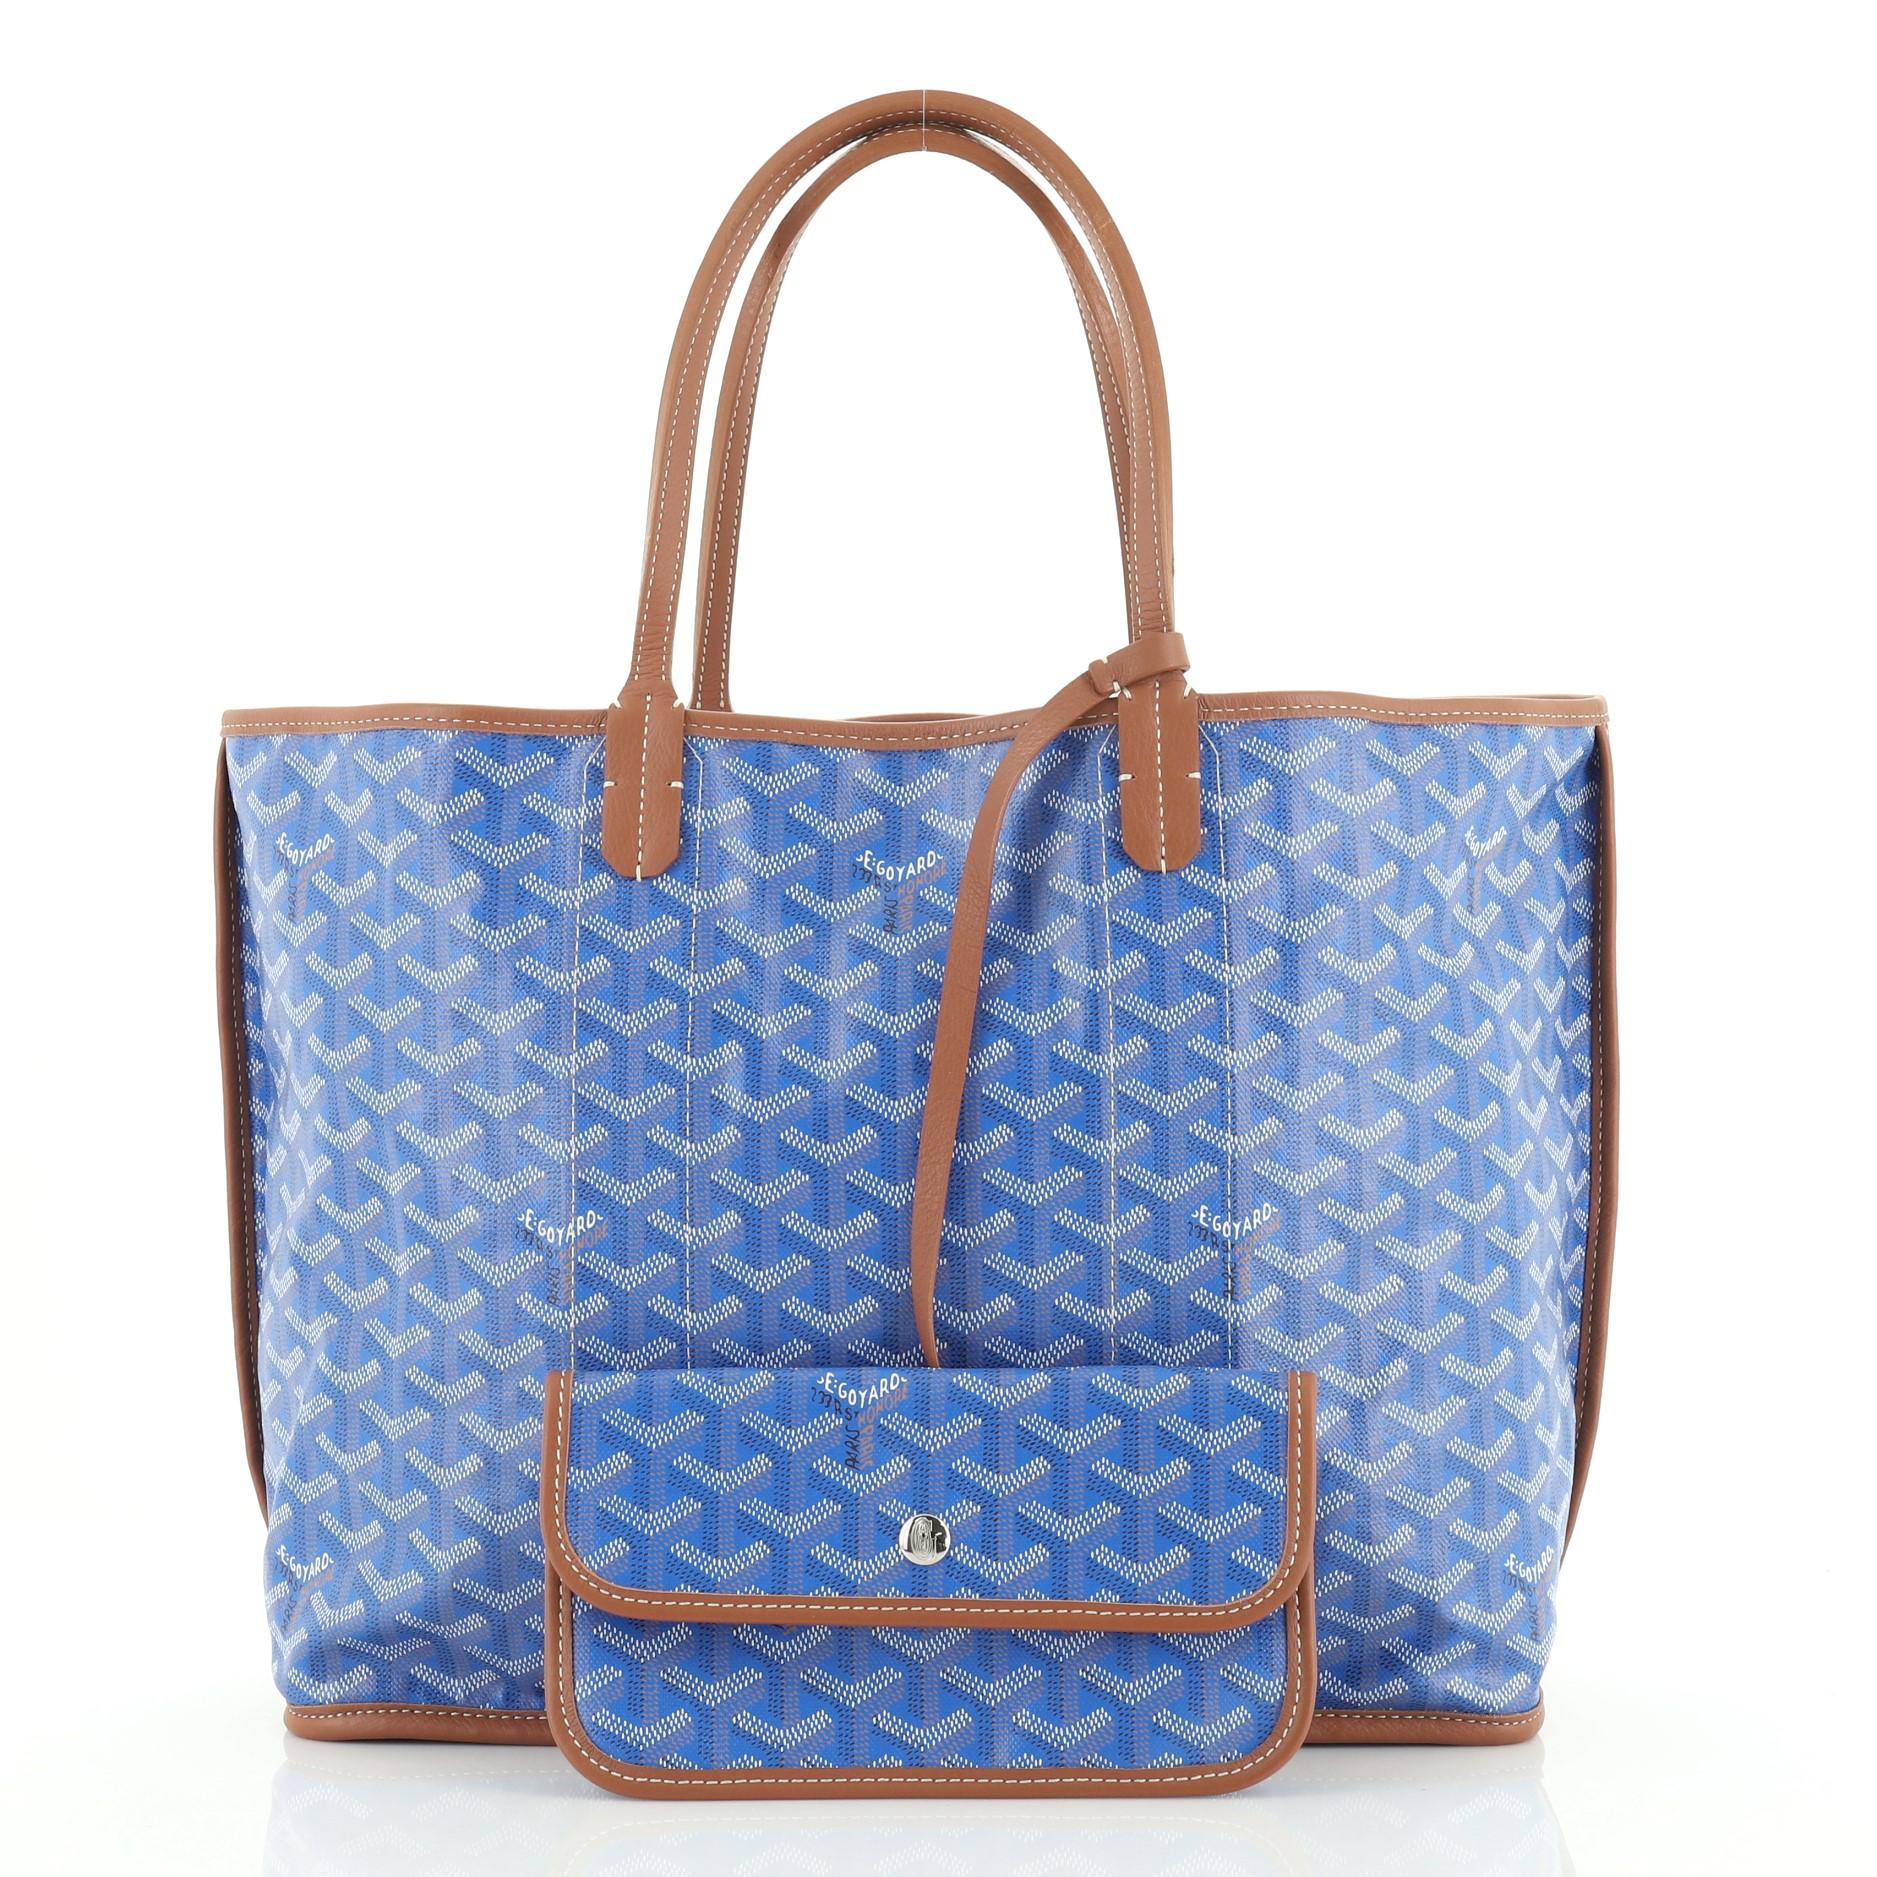 This Goyard St. Louis Pertuis Tote Coated Canvas PM, crafted from blue Goyard chevron coated canvas, features tall leather handles, leather trim, and silver-tone hardware. Its wide open top showcases a reversible neutral canvas interior.

Condition: